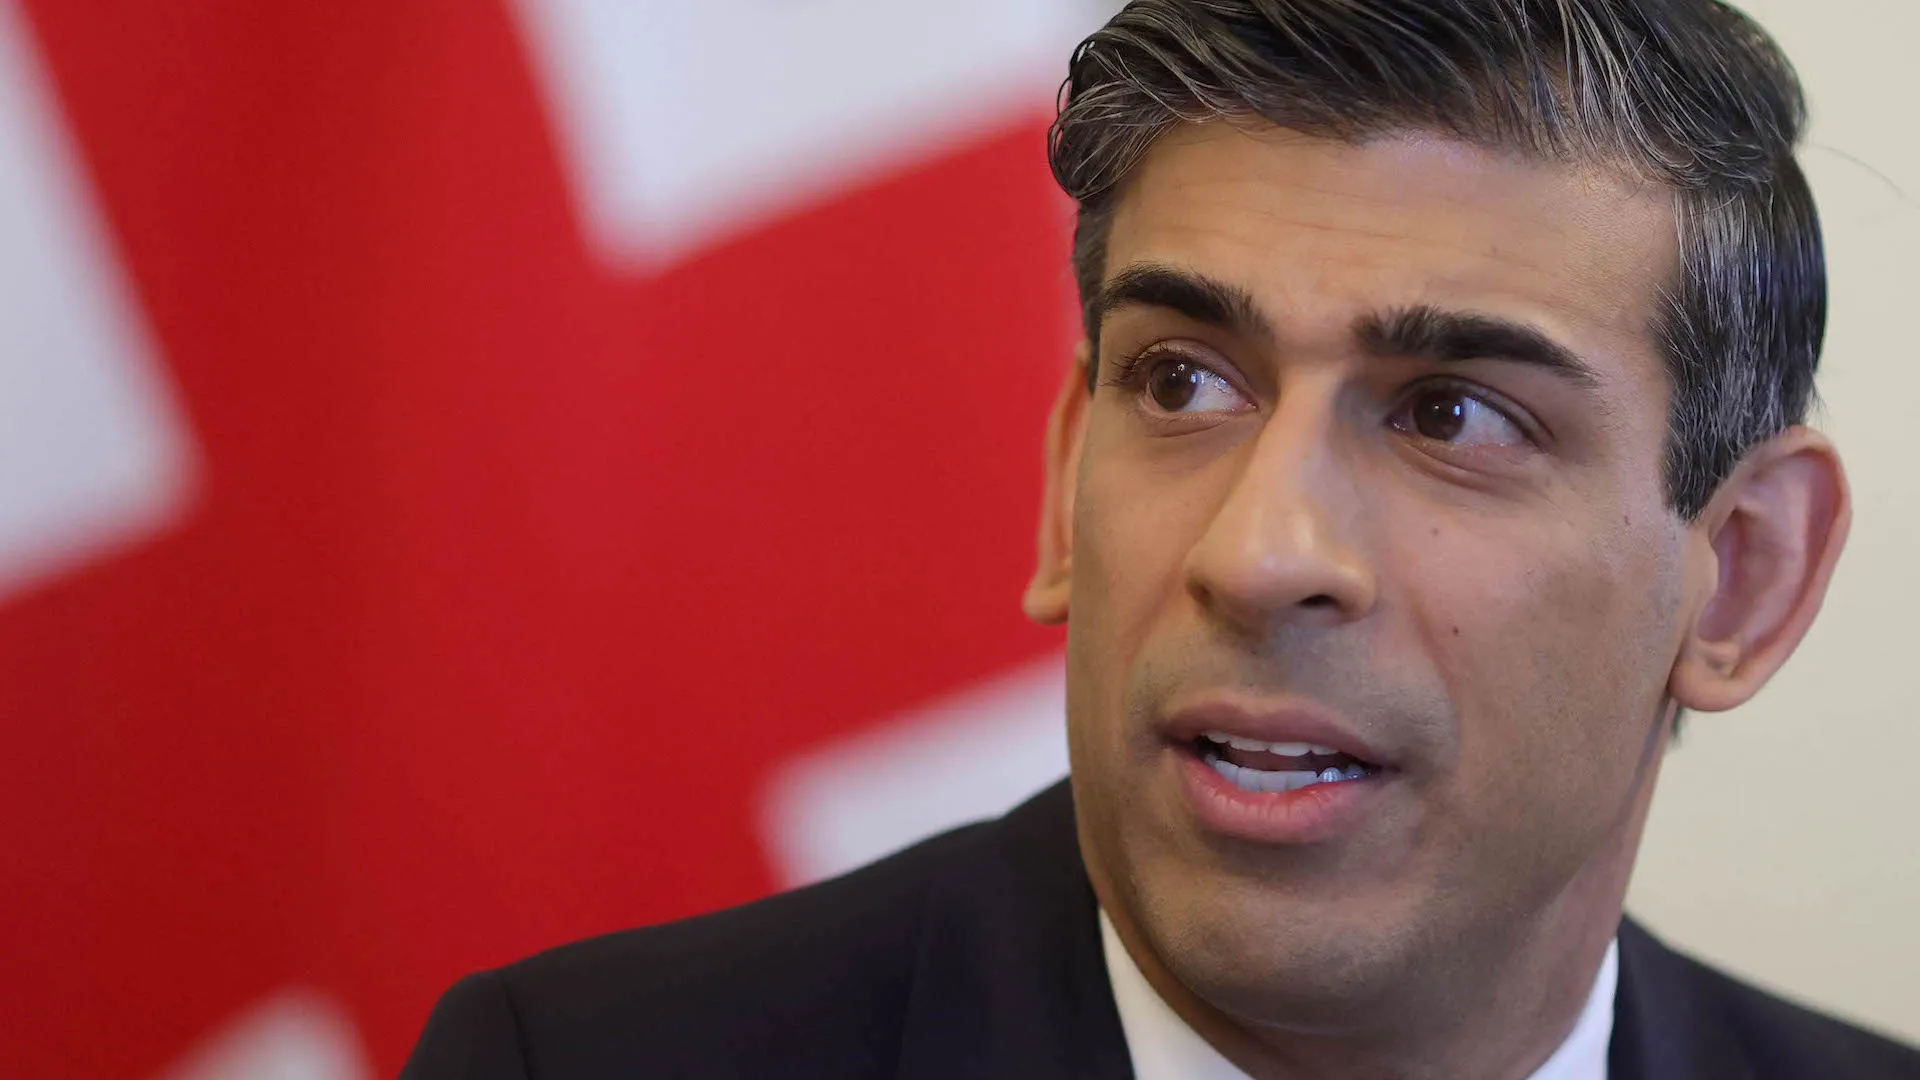 Rishi Sunak’s New Plan to Reform Benefits Faces Strong Headwinds